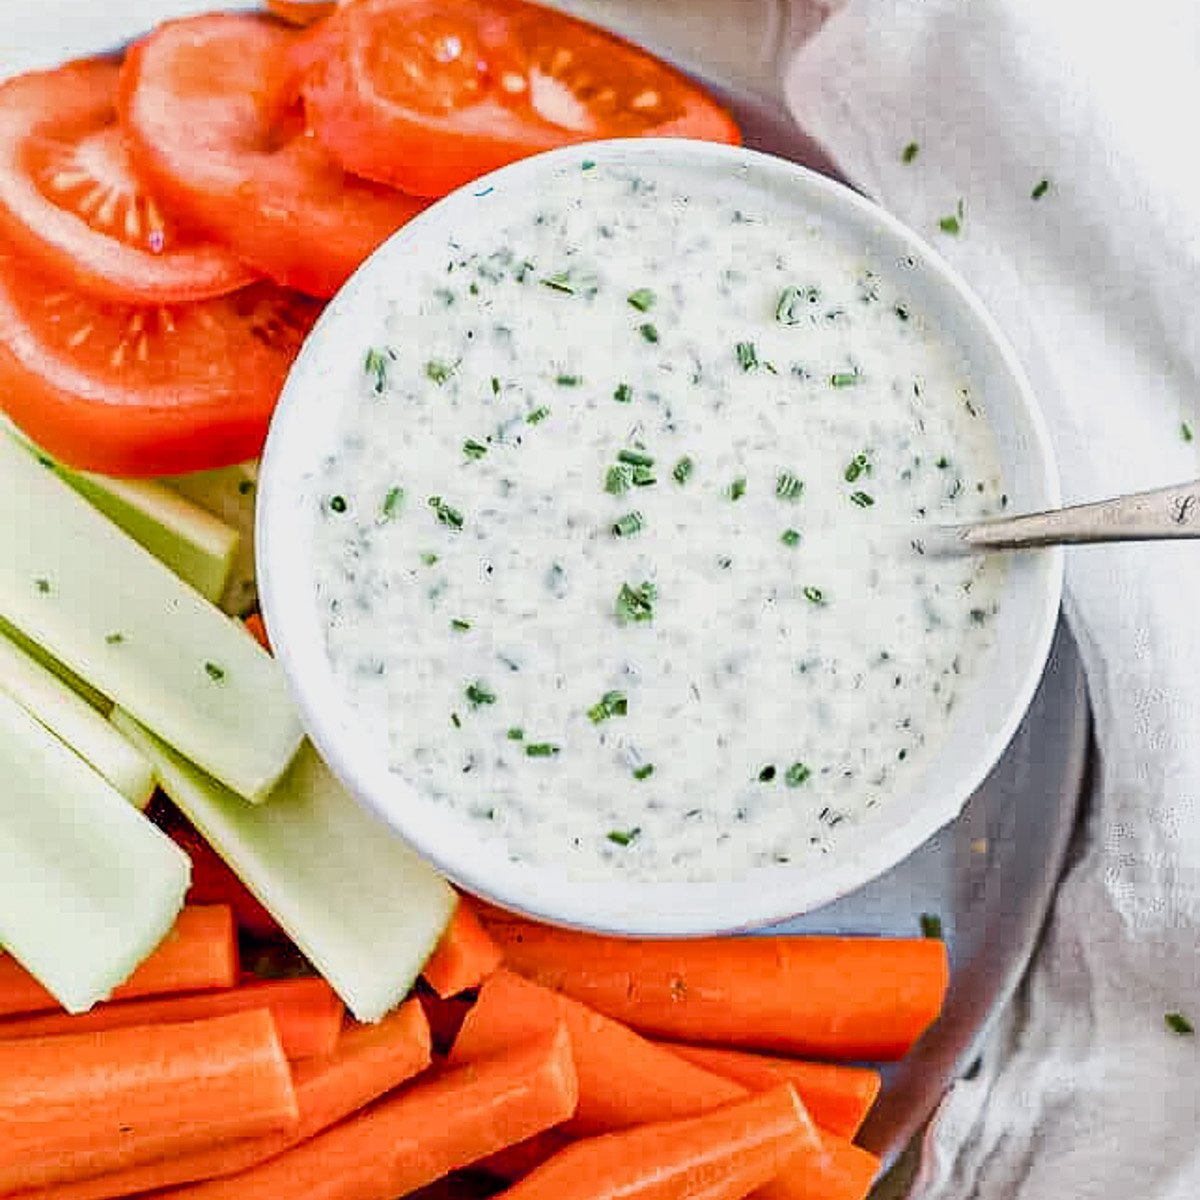 https://whatmollymade.com/wp-content/uploads/2019/03/whole30-ranch-dressing-2.jpg